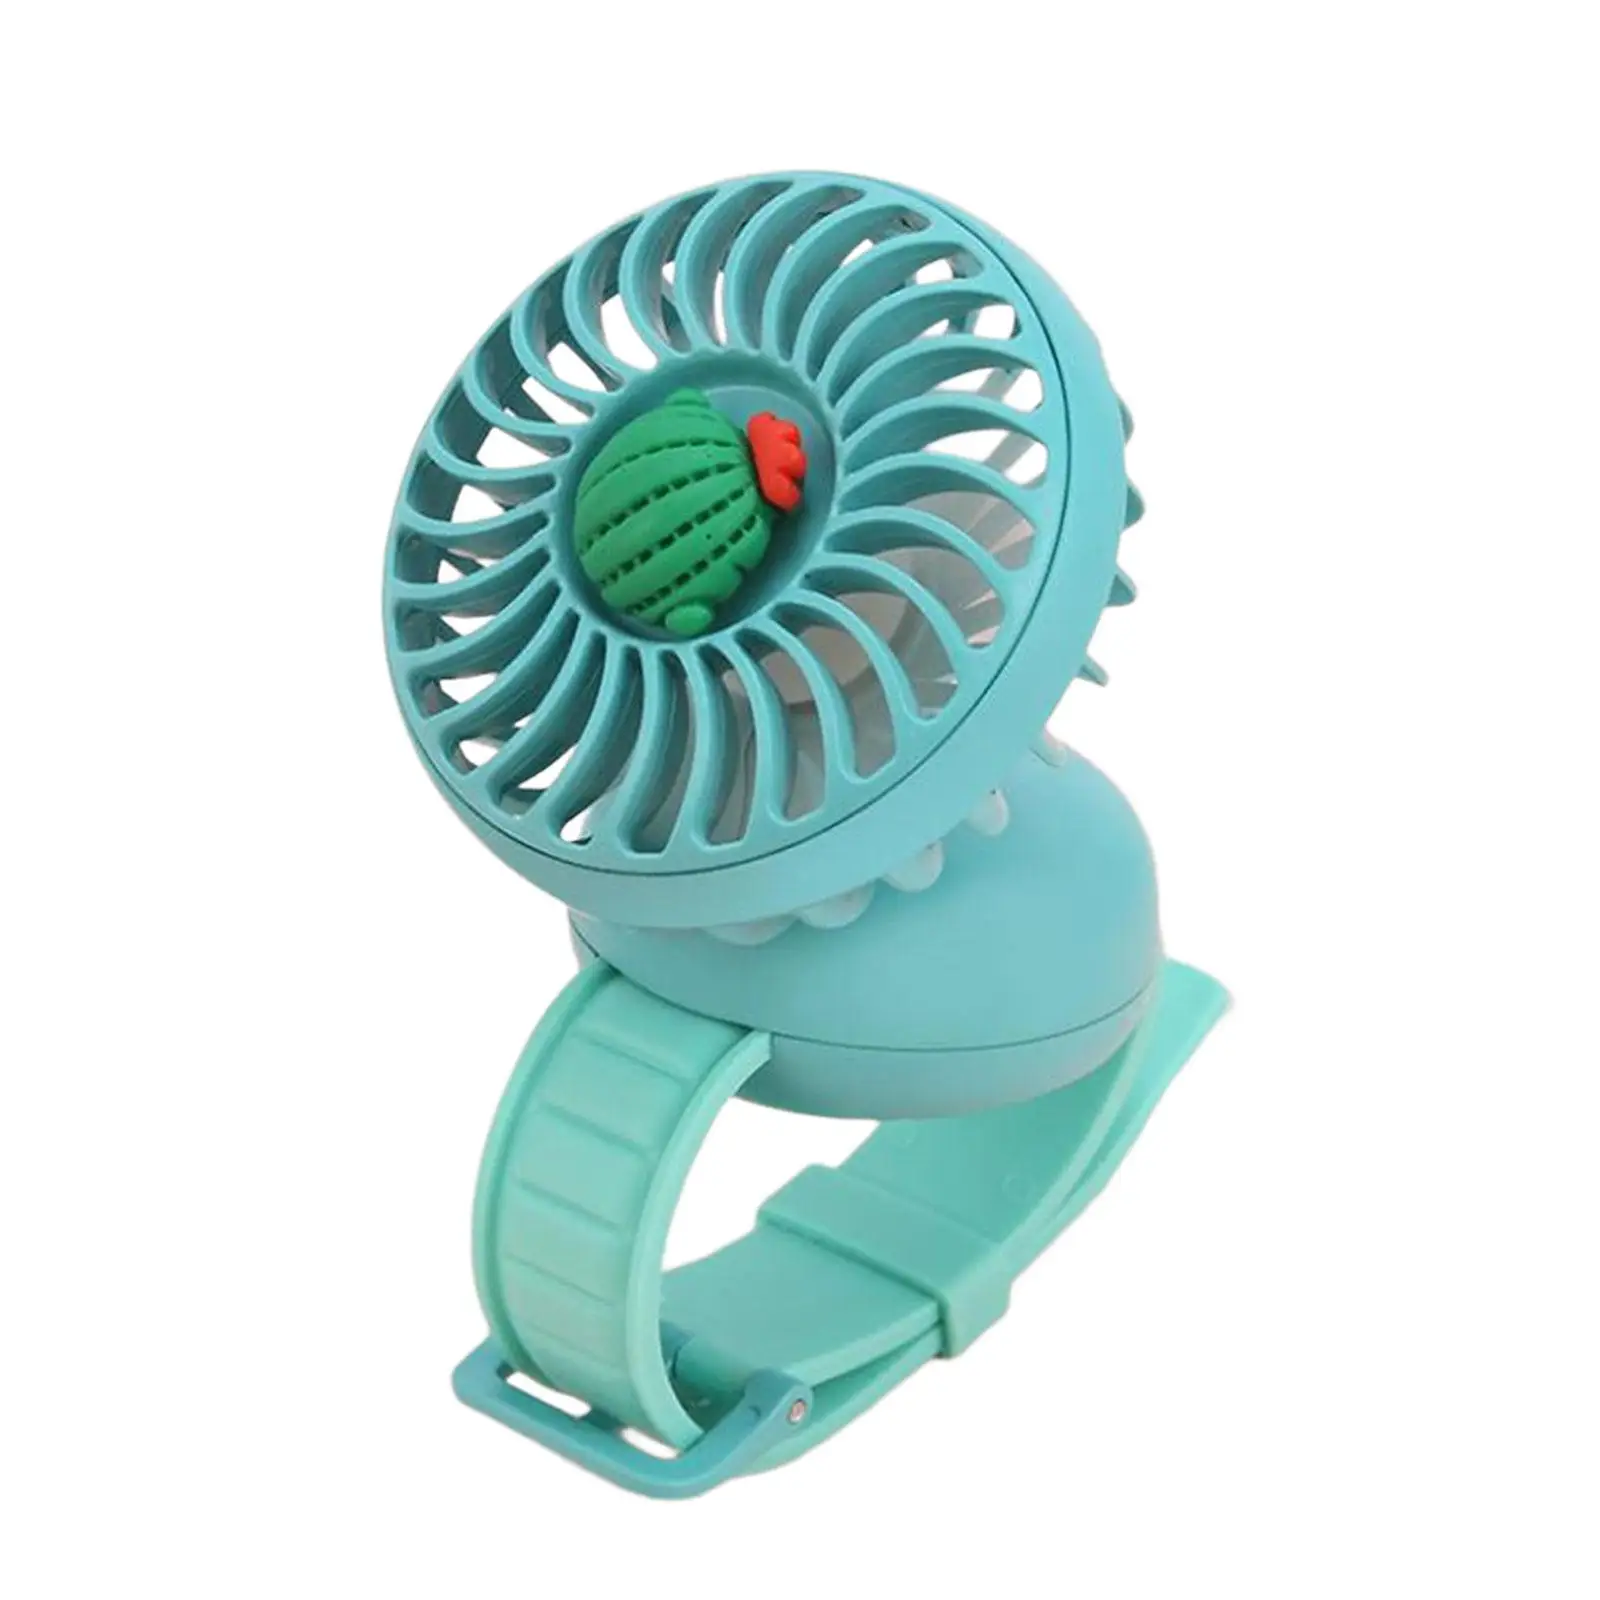 Electric Portable Mini Handheld Fan with Adjustable Wristband 3 Wind Level Settings Cute Wrist Fan for Travel Sport Outdoor Home